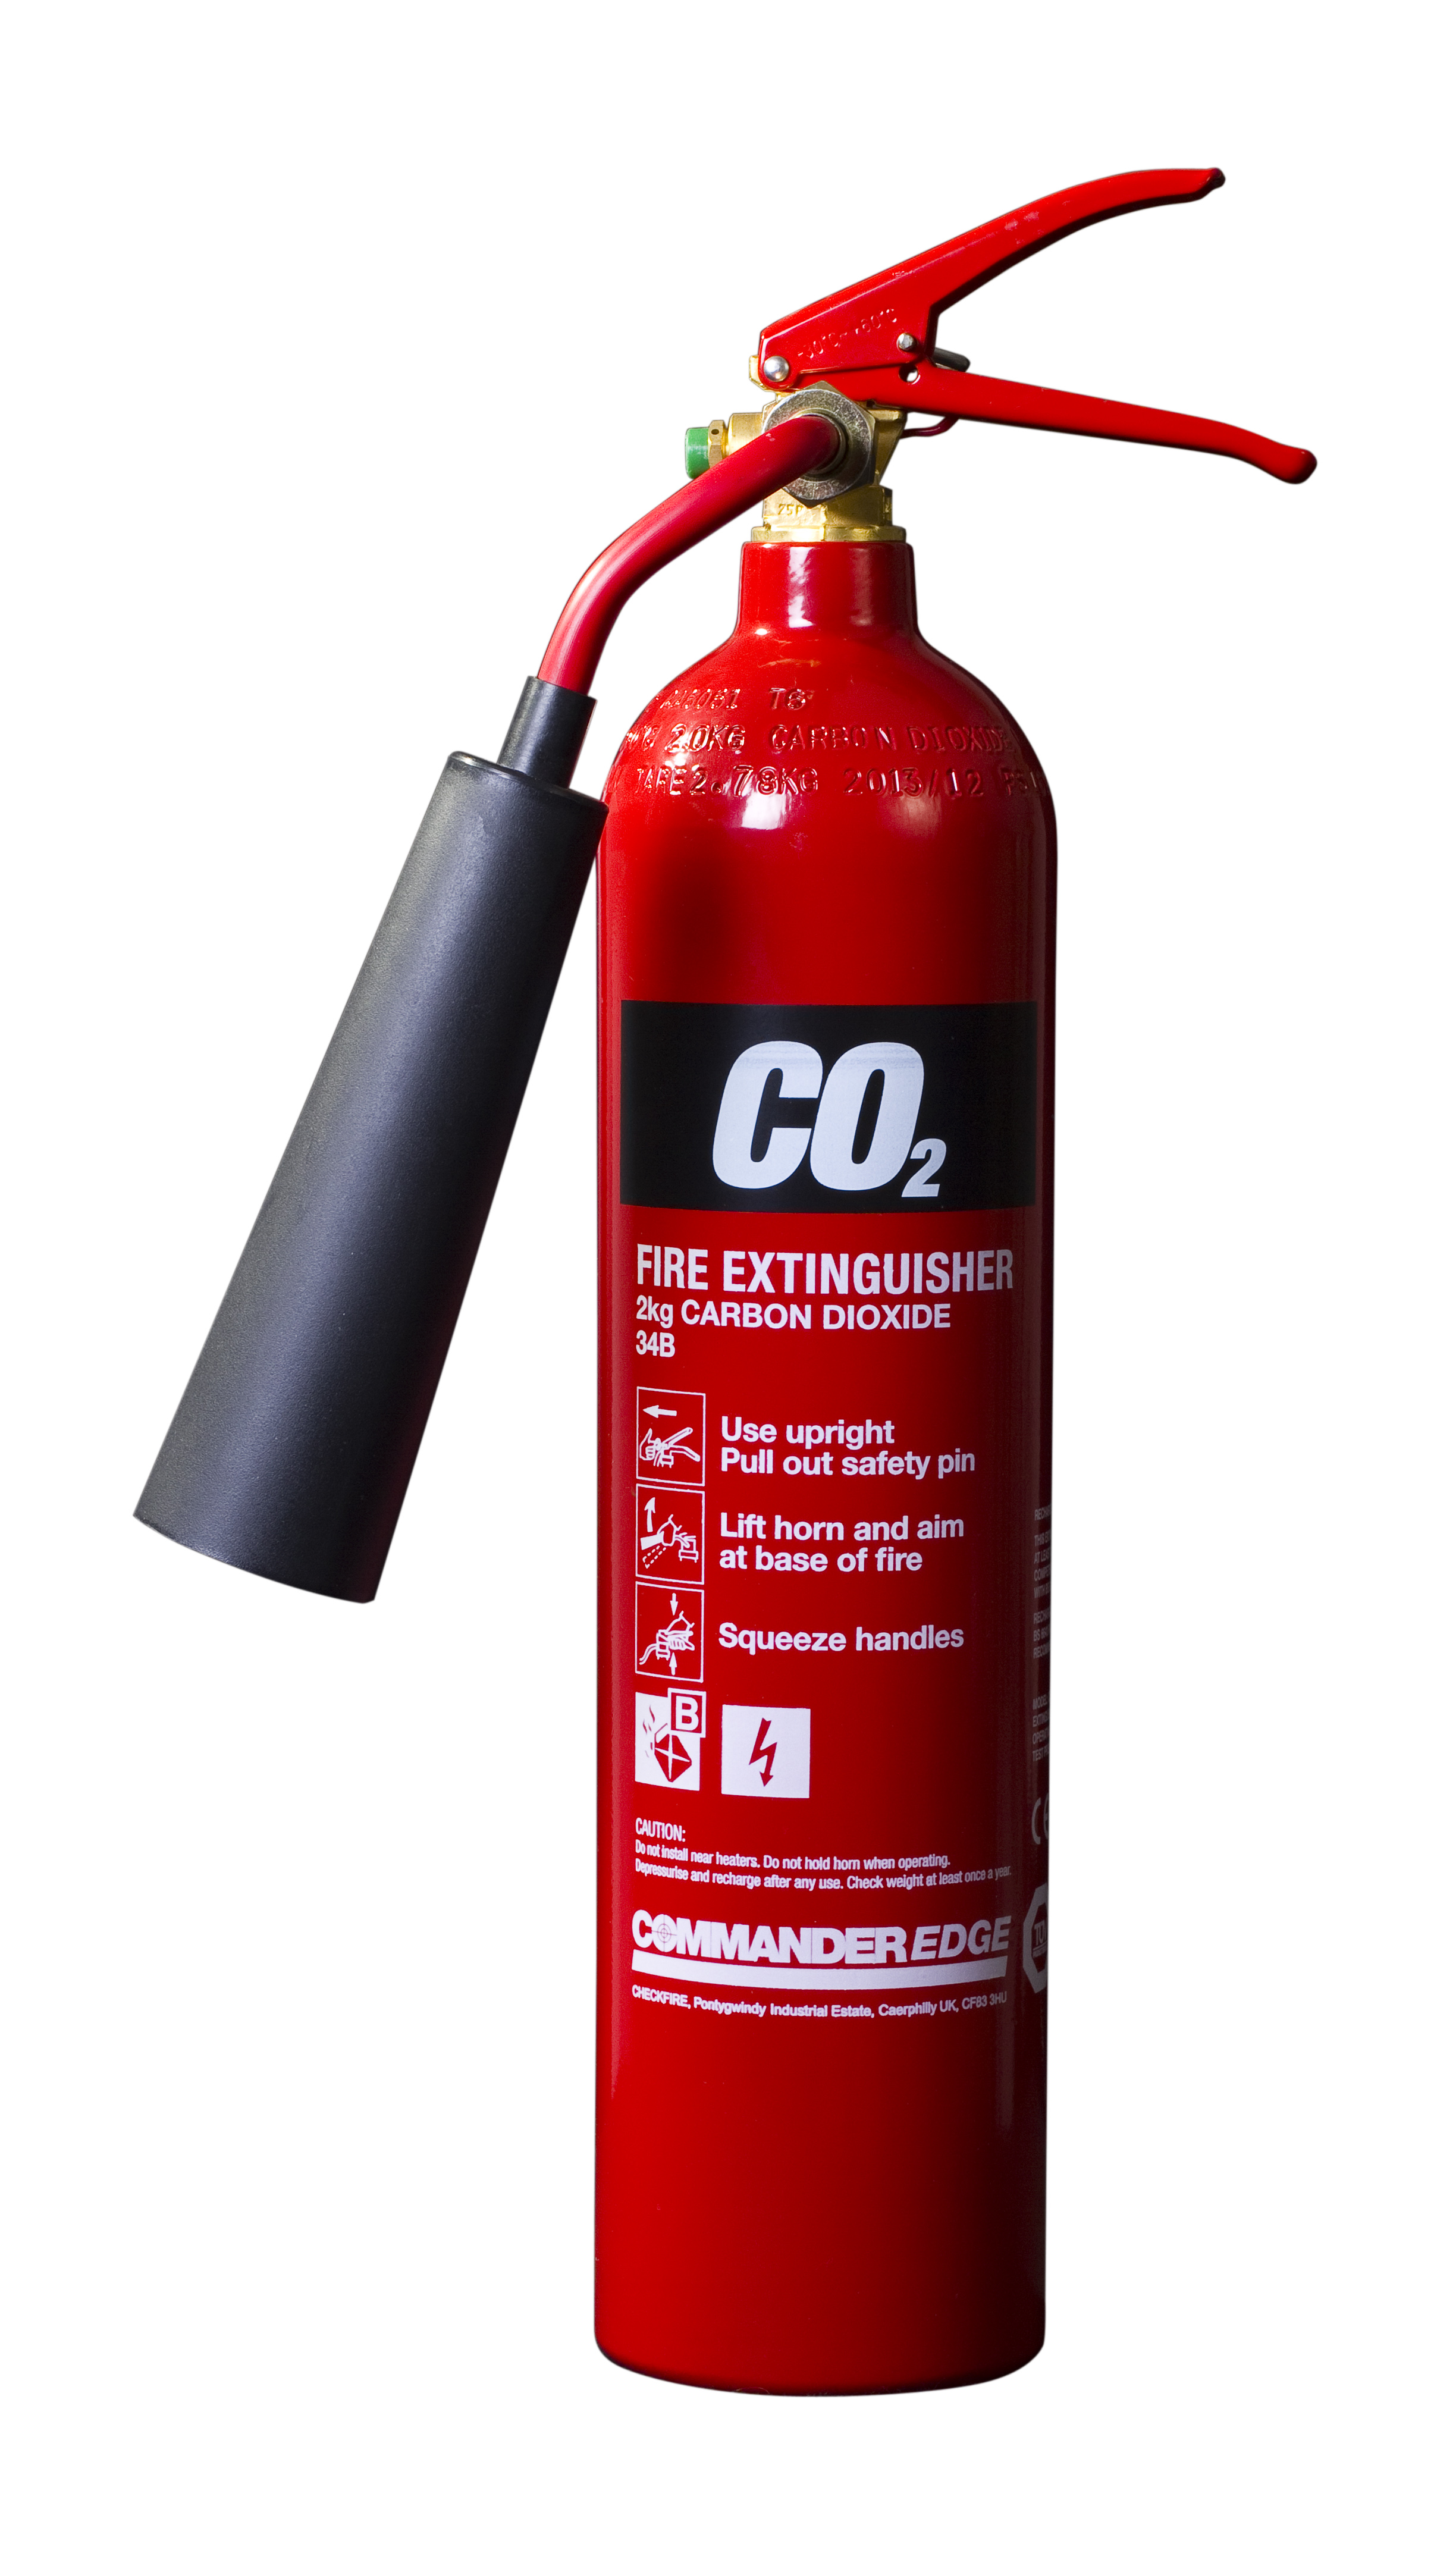 Portable fire extinguisher types